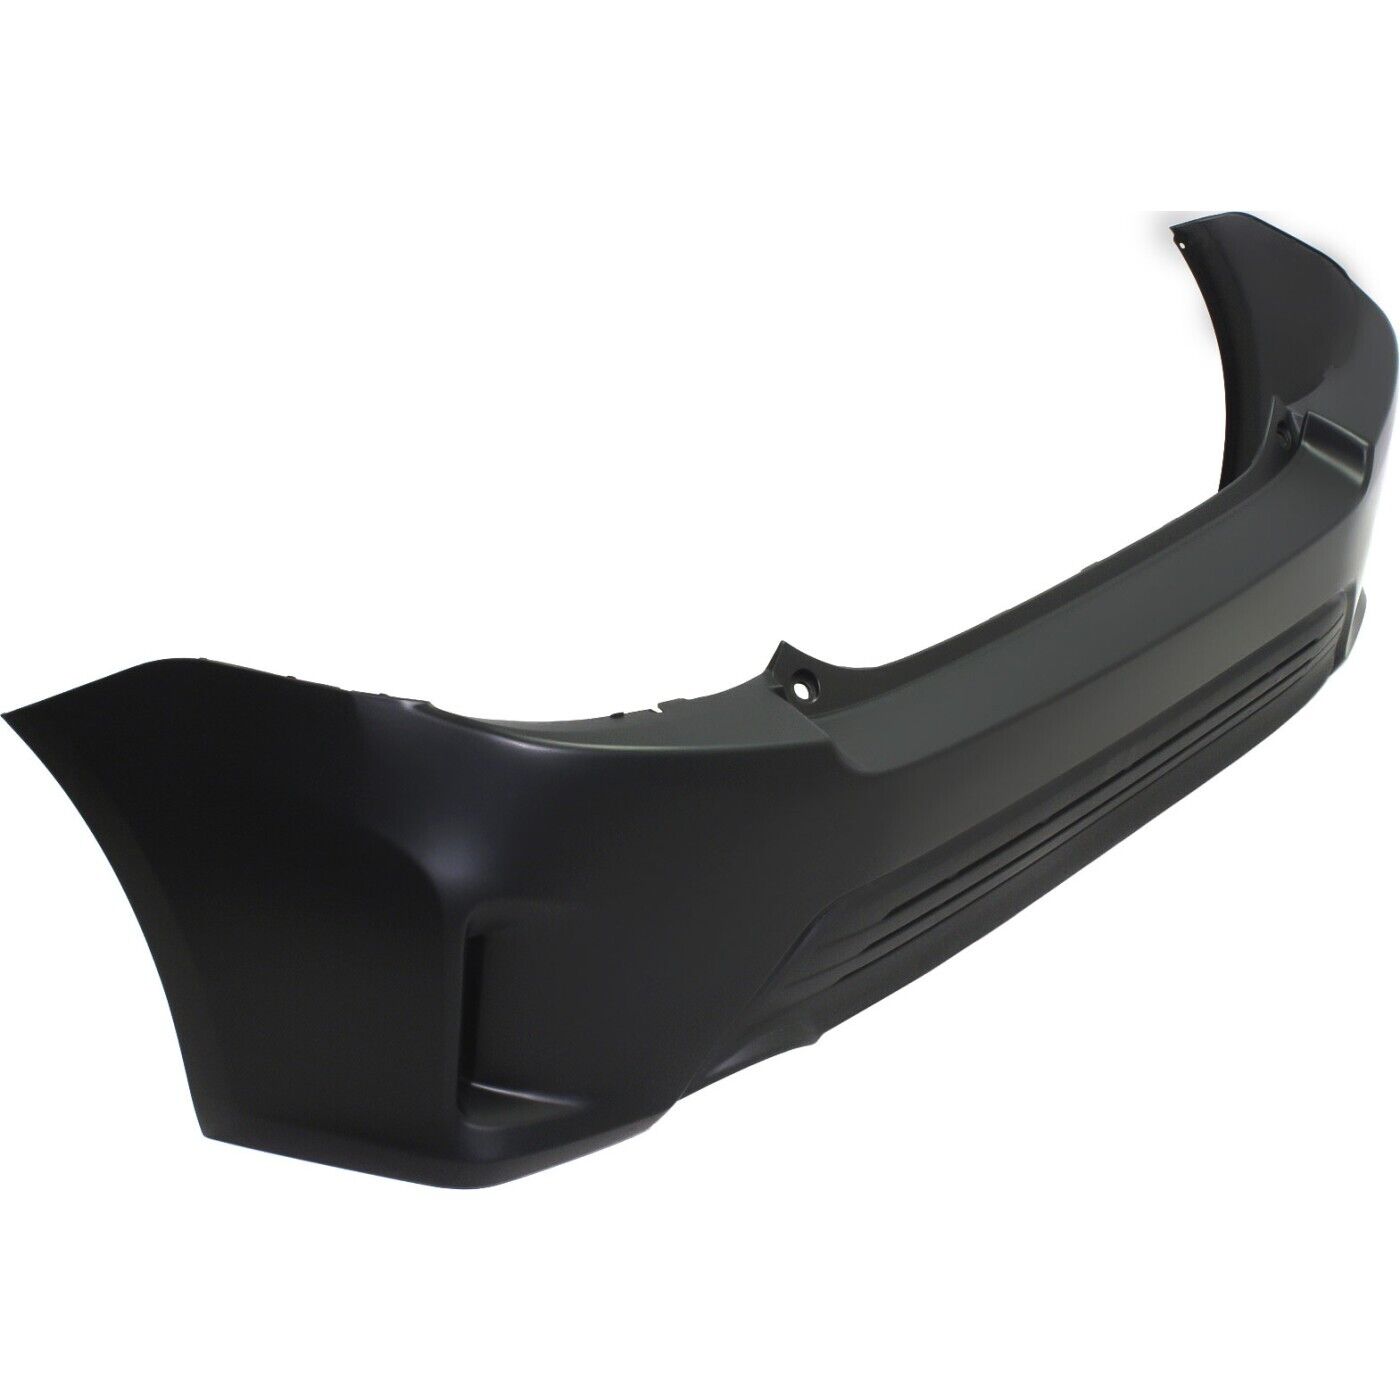 2014-2016 SCION tC; Rear Bumper Cover; Partial textd Painted to Match